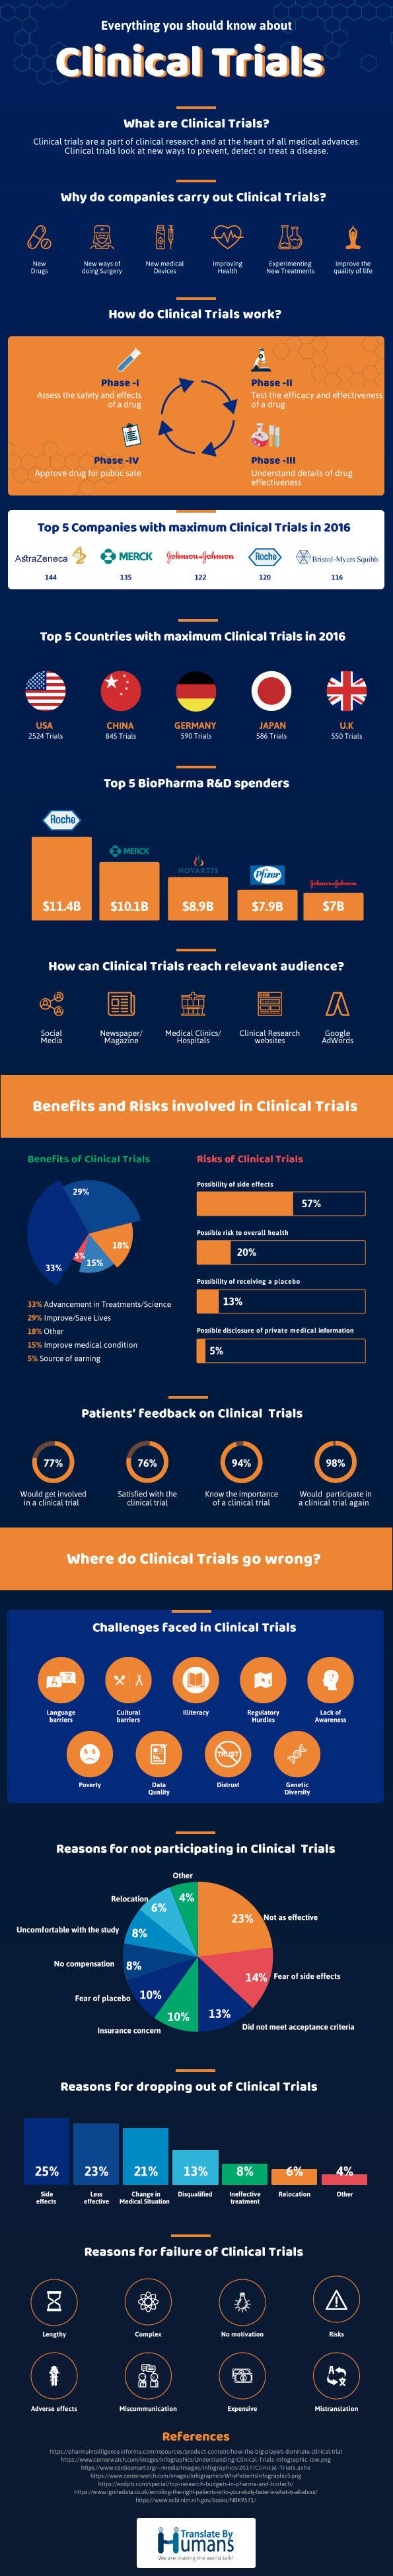 Clinical trails infographic